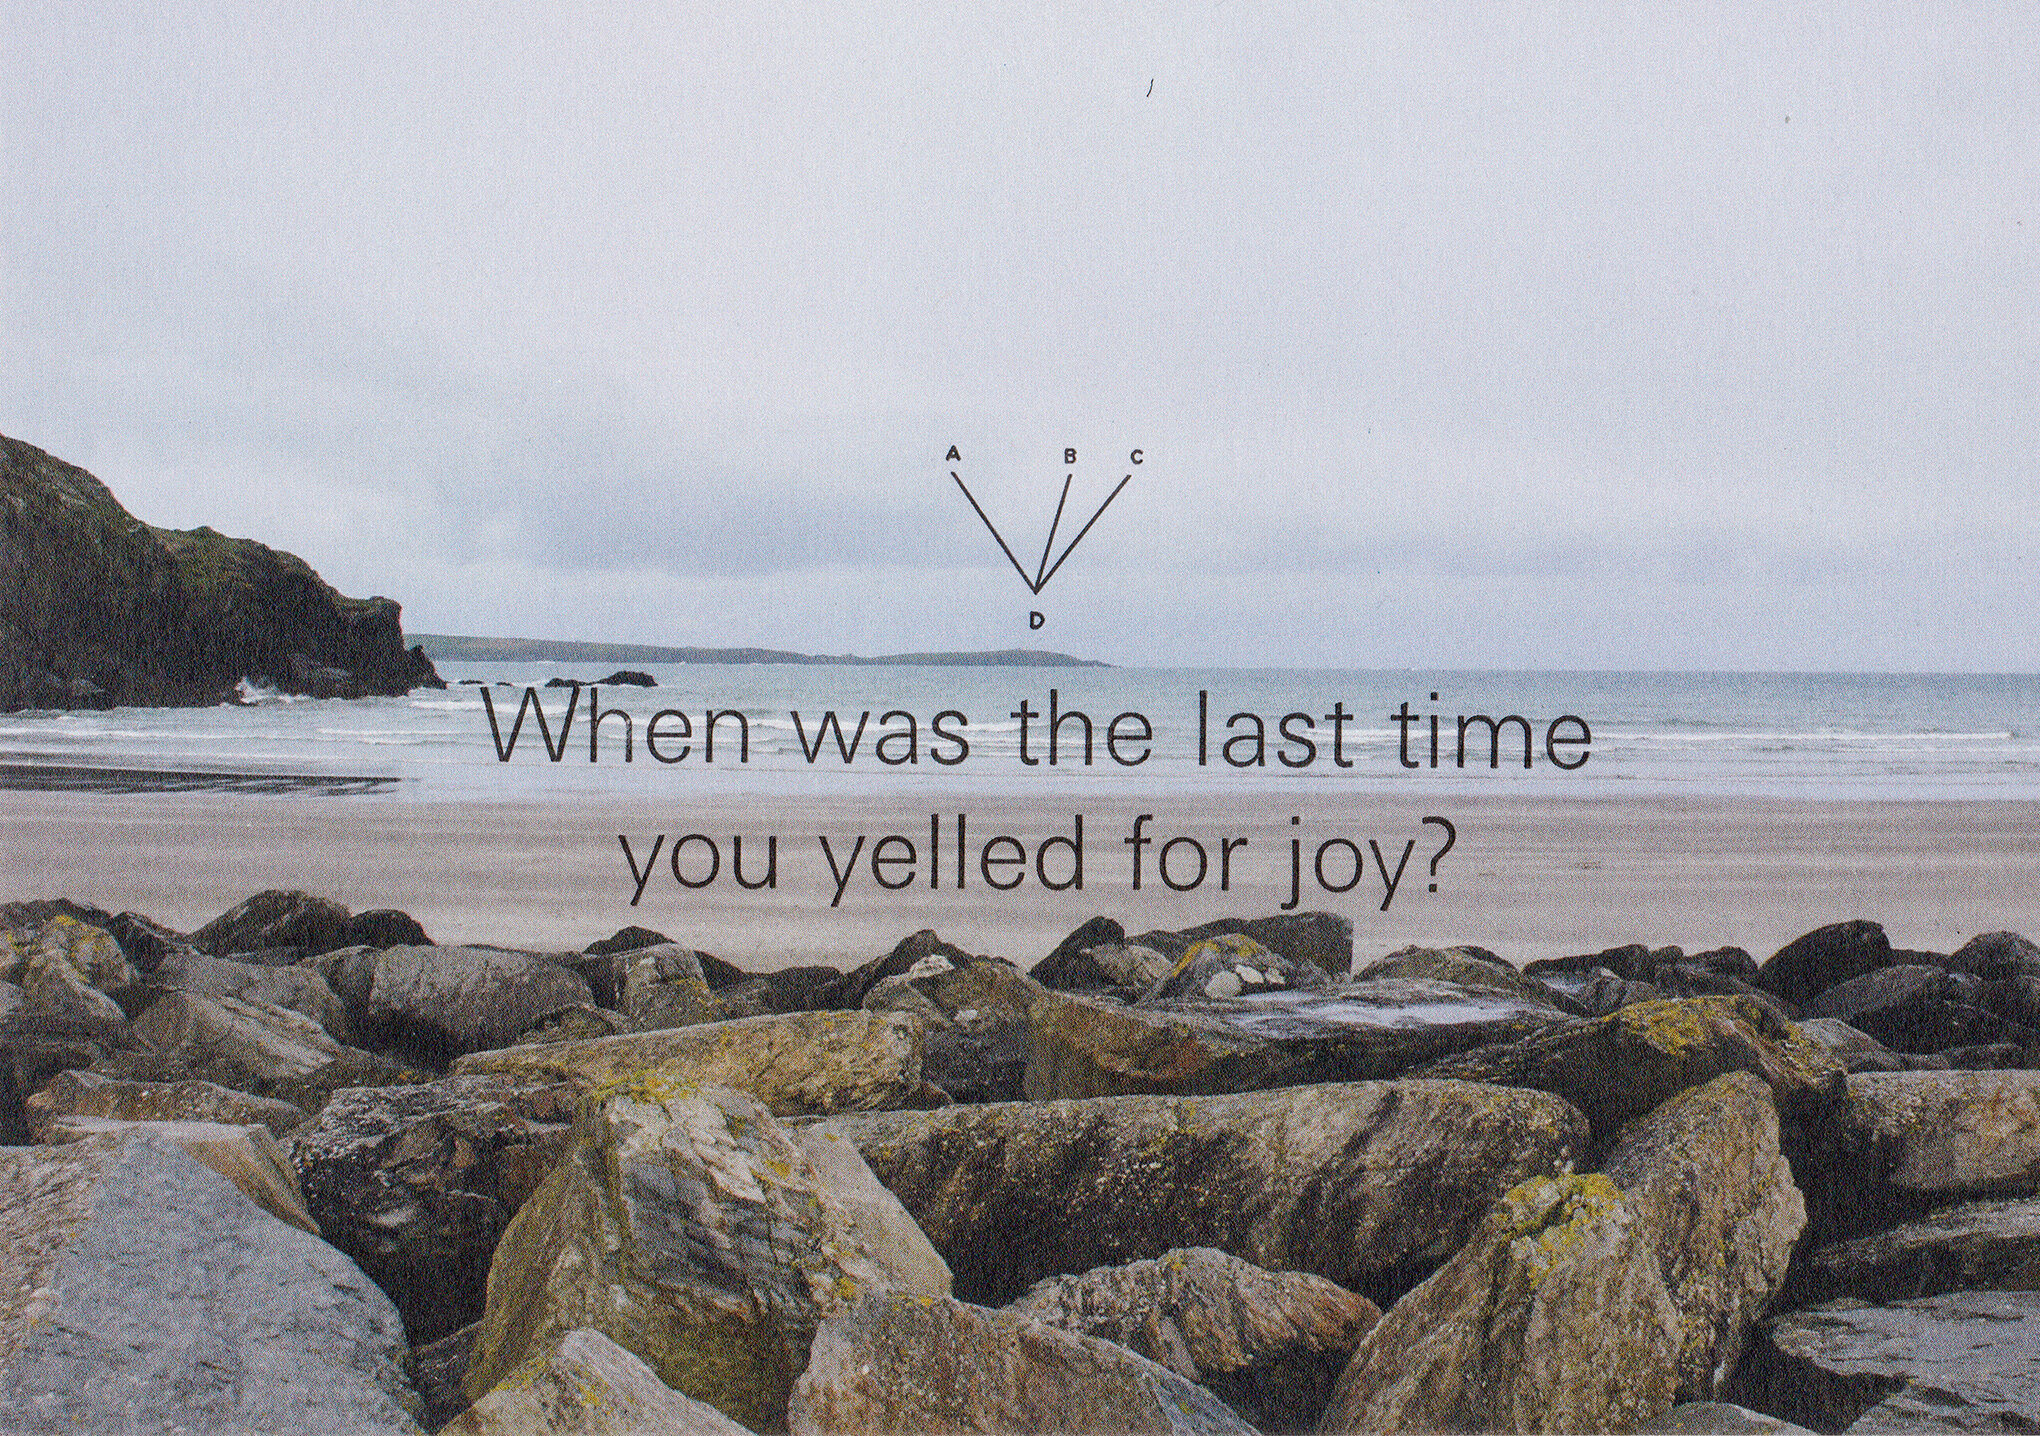 When was the last time you yelled for joy?